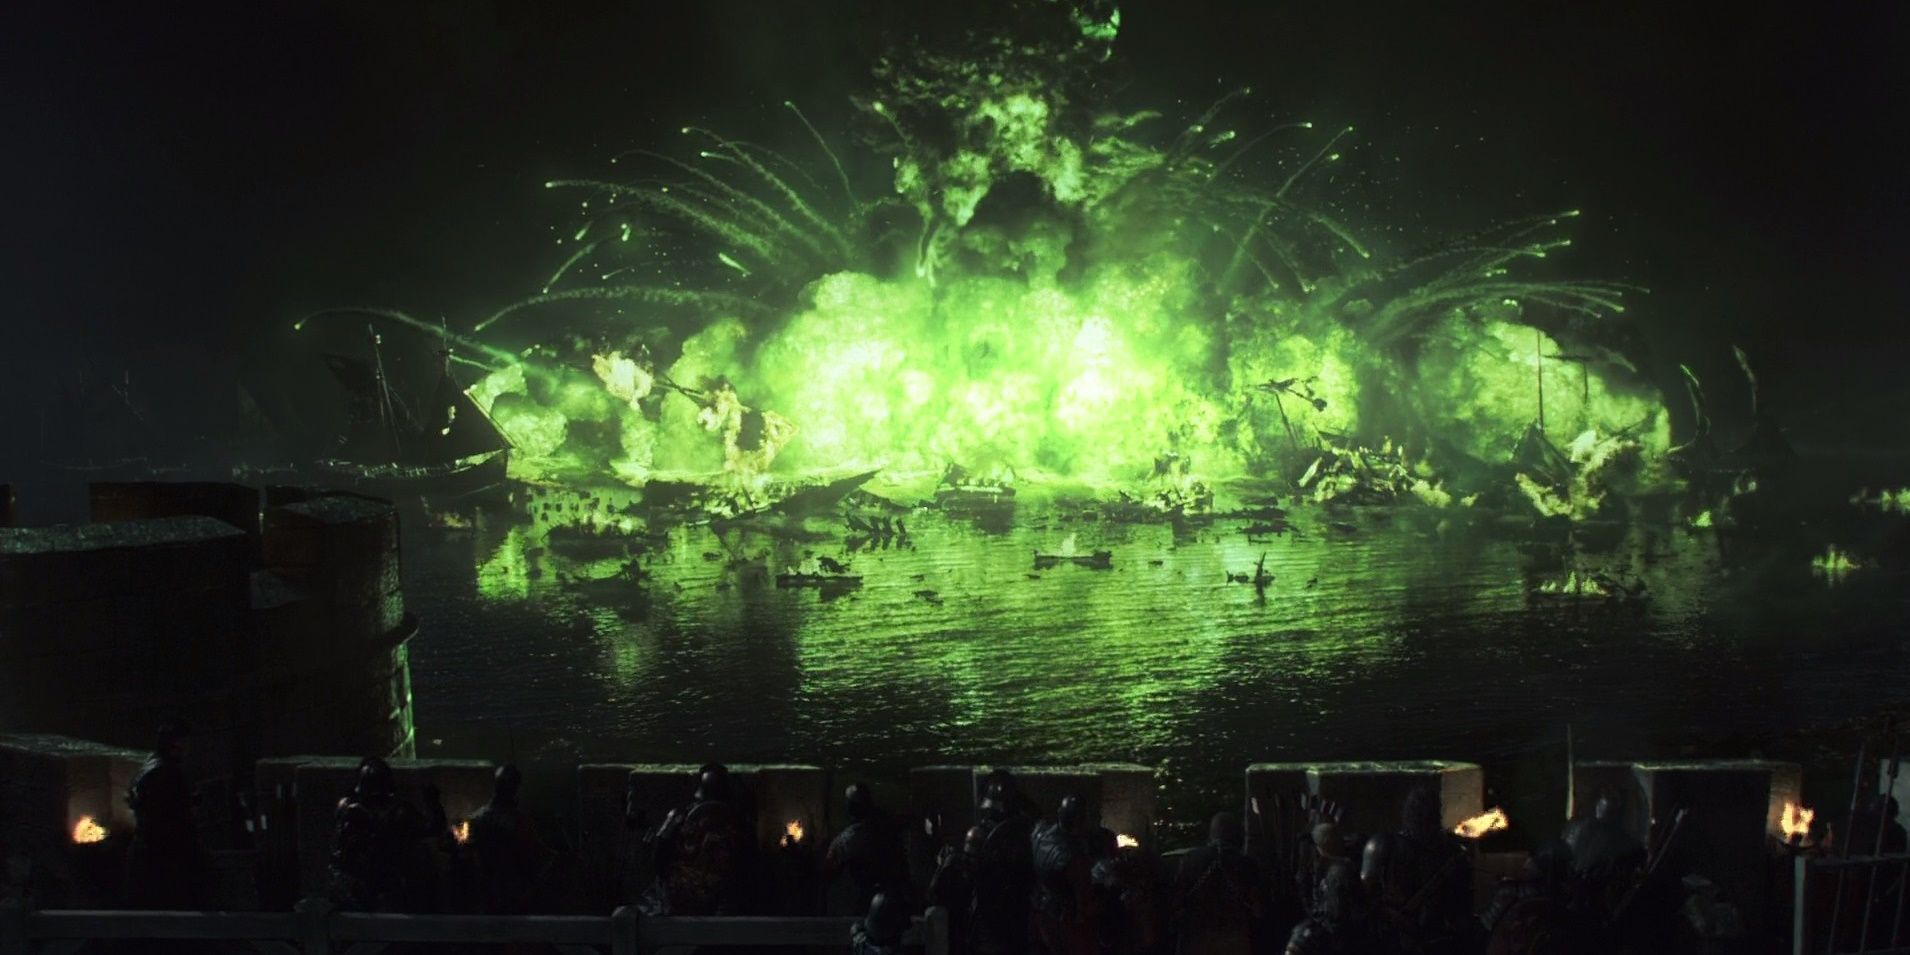 The wildfire explosion on Blackwater Bay in Game of Thrones.